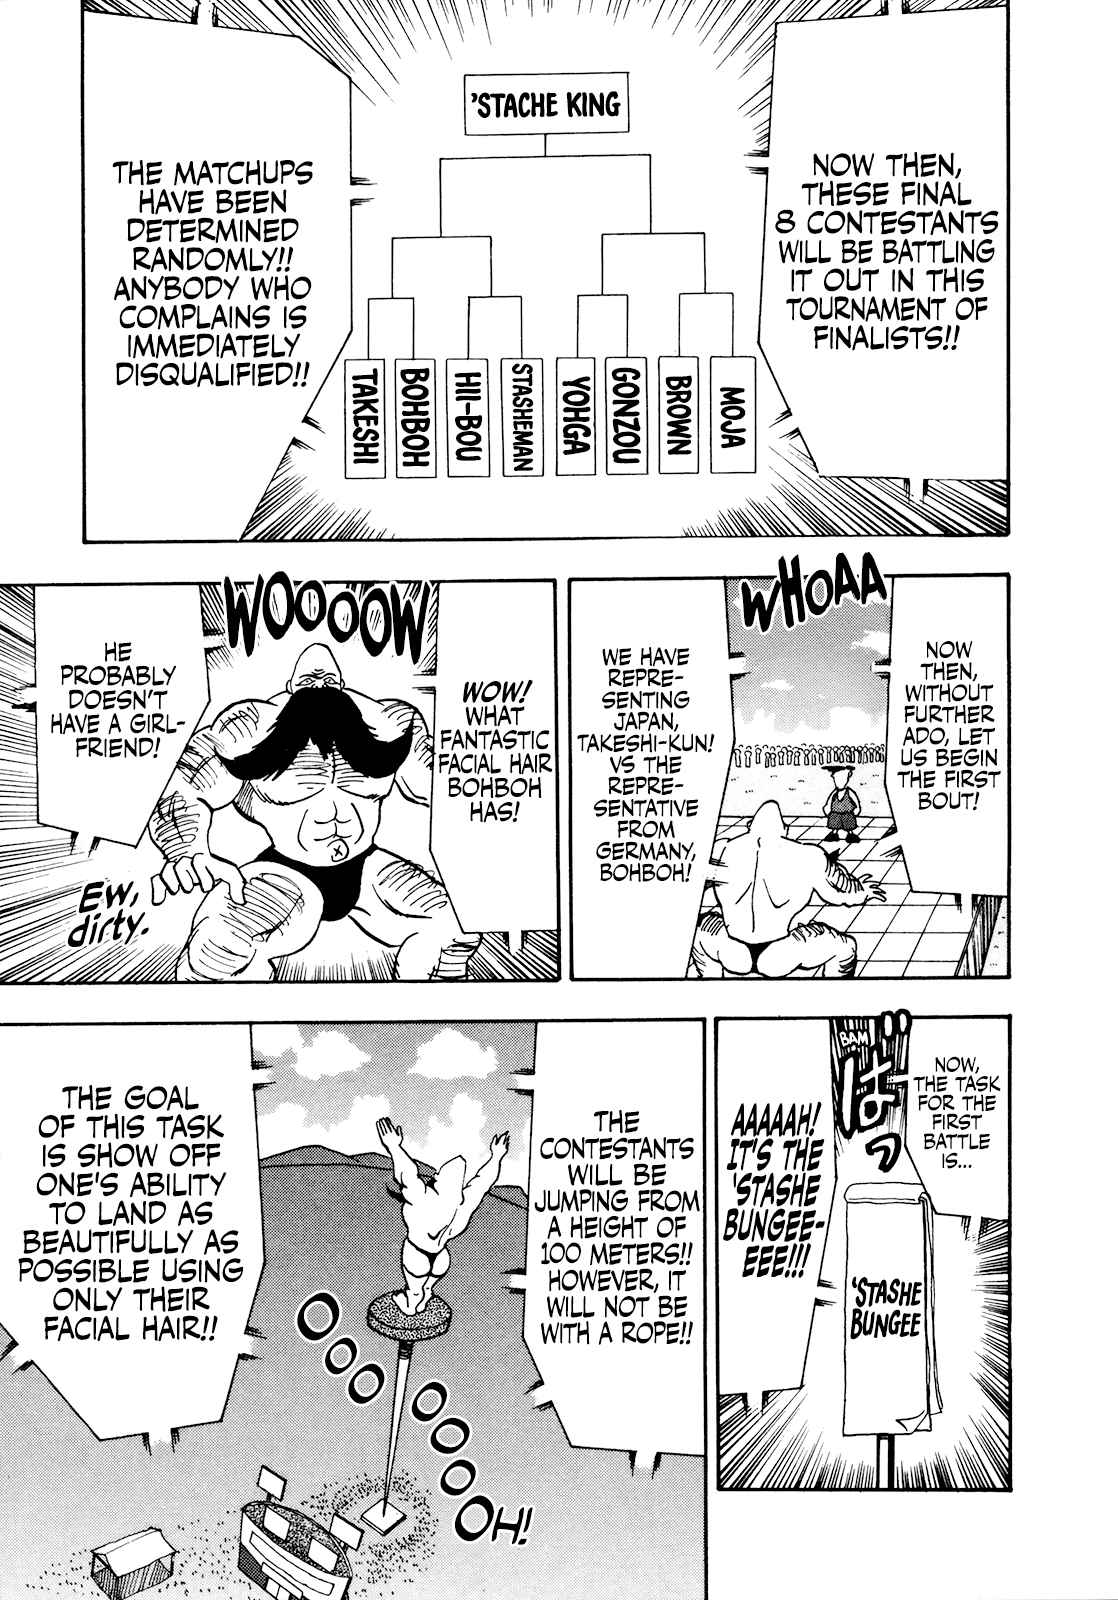 Seikimatsu Leader Den Takeshi! Vol. 3 Ch. 48 The Curtain Opens on the Mustachelympics!!